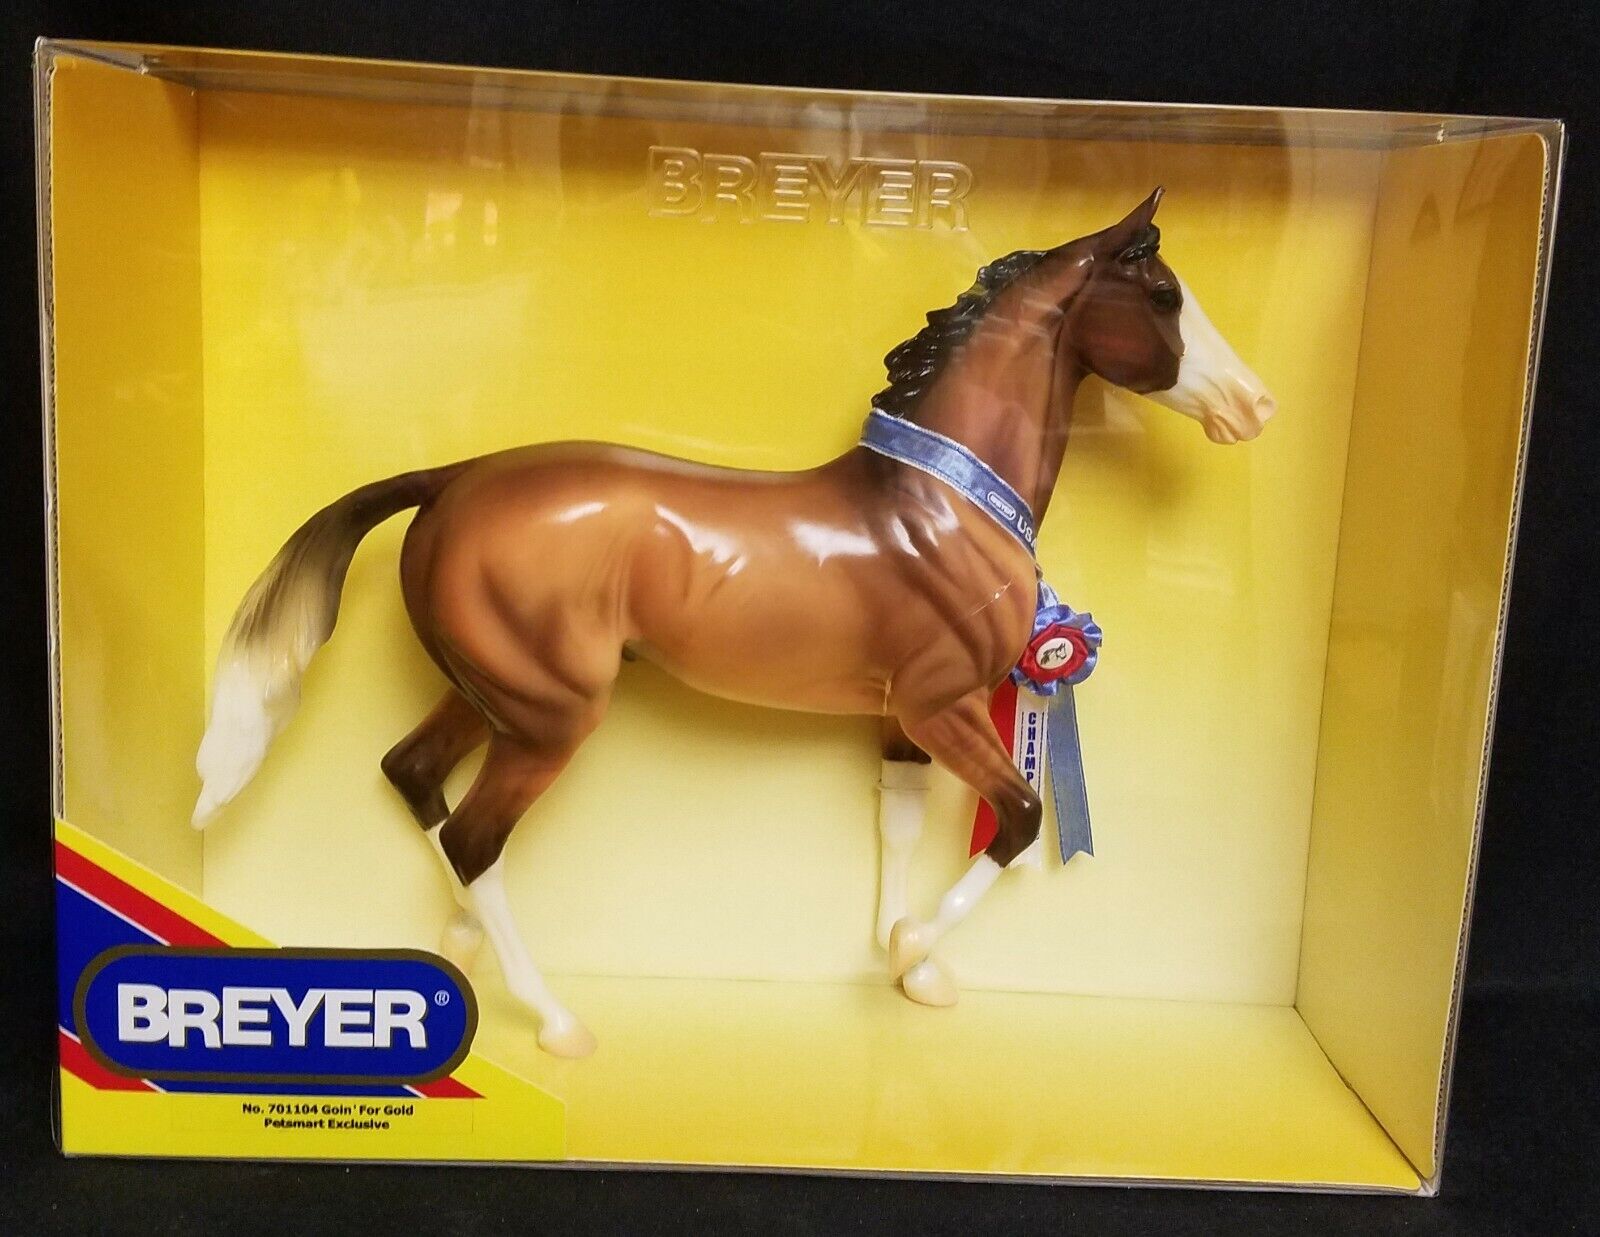 Breyer 701104 Goin\' For Gold Petsmart/State Line Tack Limited Edition AWS & NIB